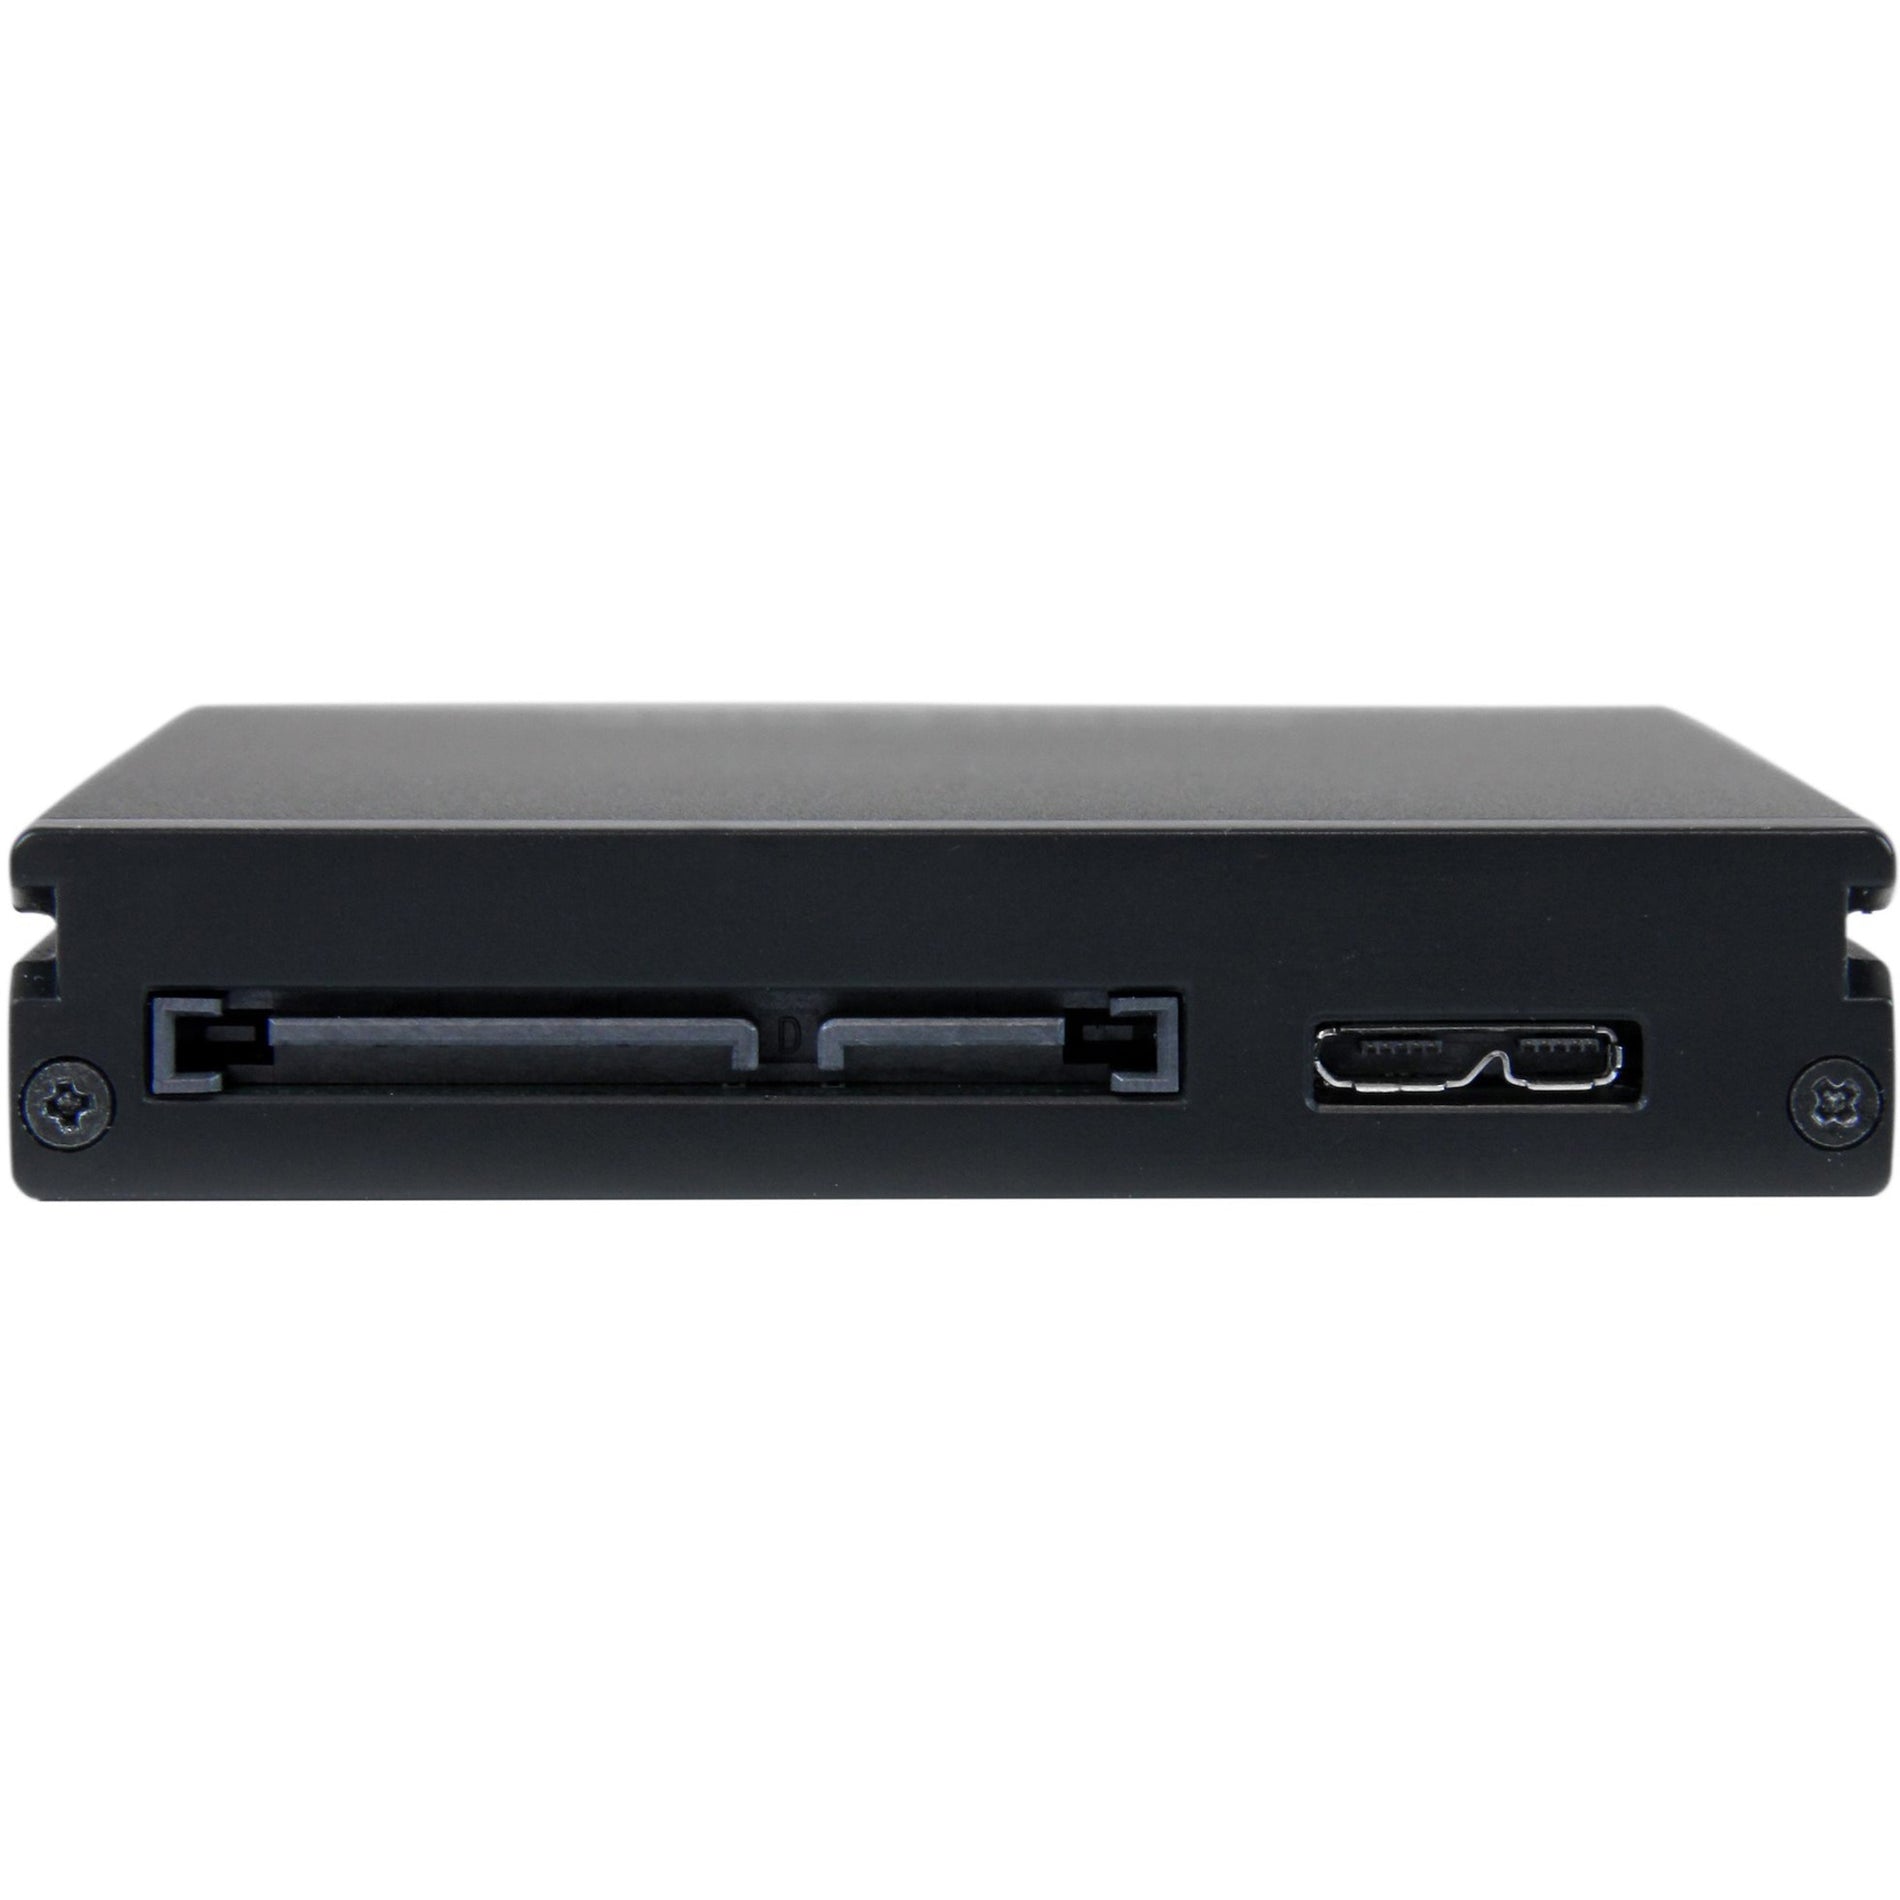 StarTech.com S251BU31REMD USB-C Hard Drive Enclosure for 2.5" SATA SSD / HDD, USB 3.1 10Gbps, Easy External Storage Solution